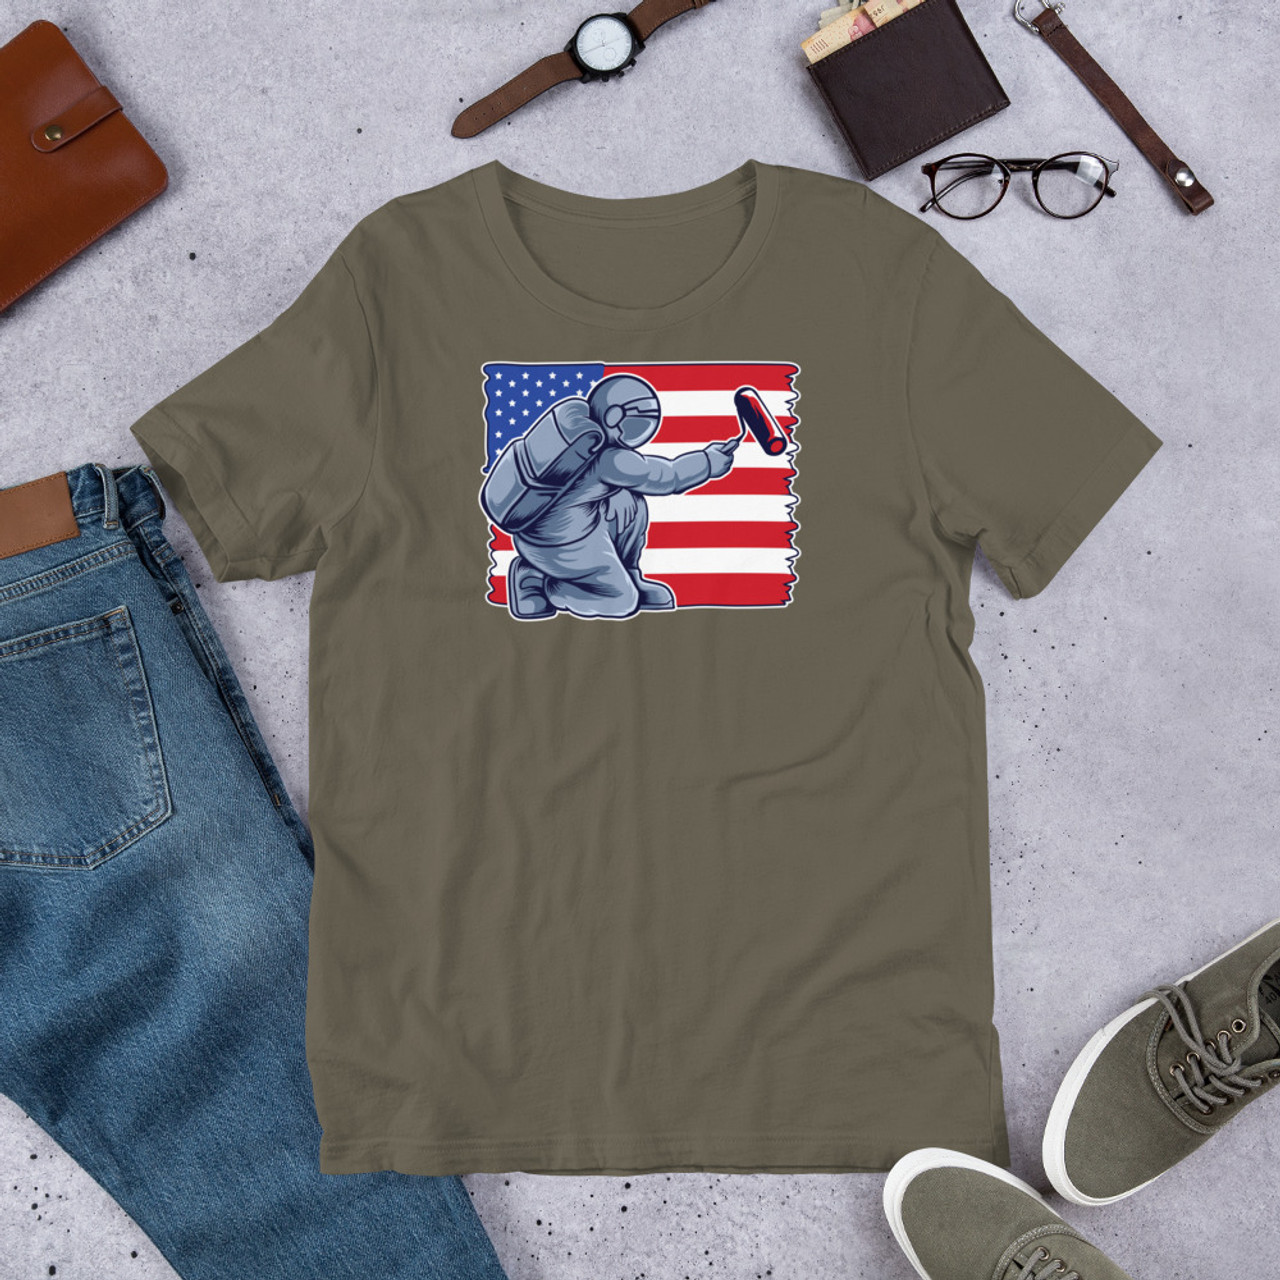 Army T-Shirt - Bella + Canvas 3001 Astronaut Painting Flag